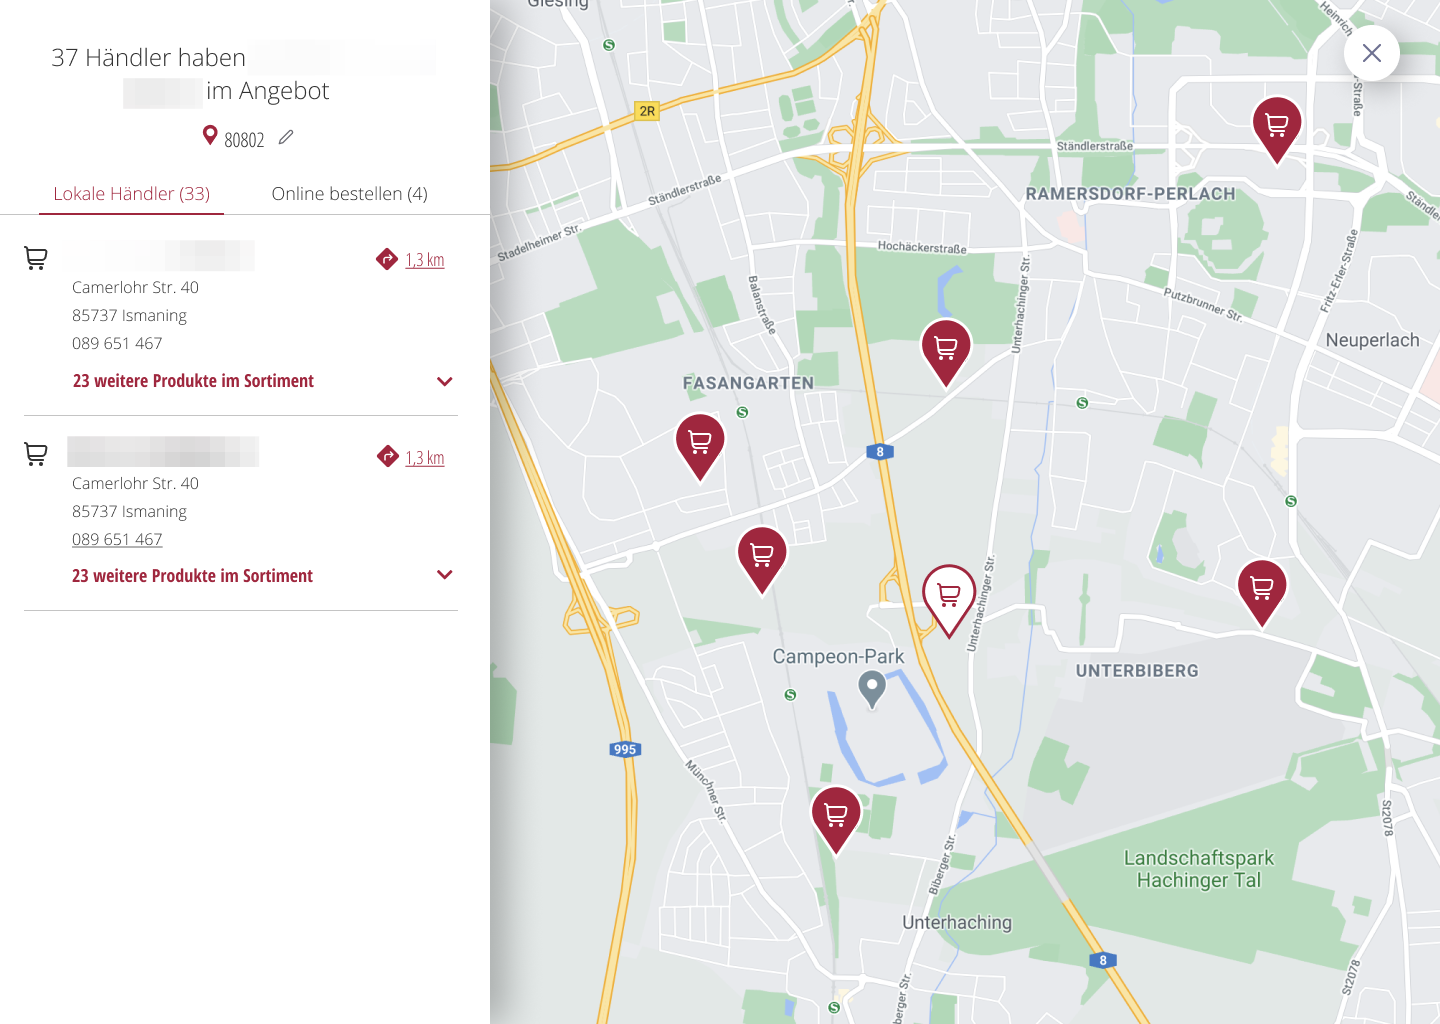 Results of Shopfinder showing the different locations where the product is found